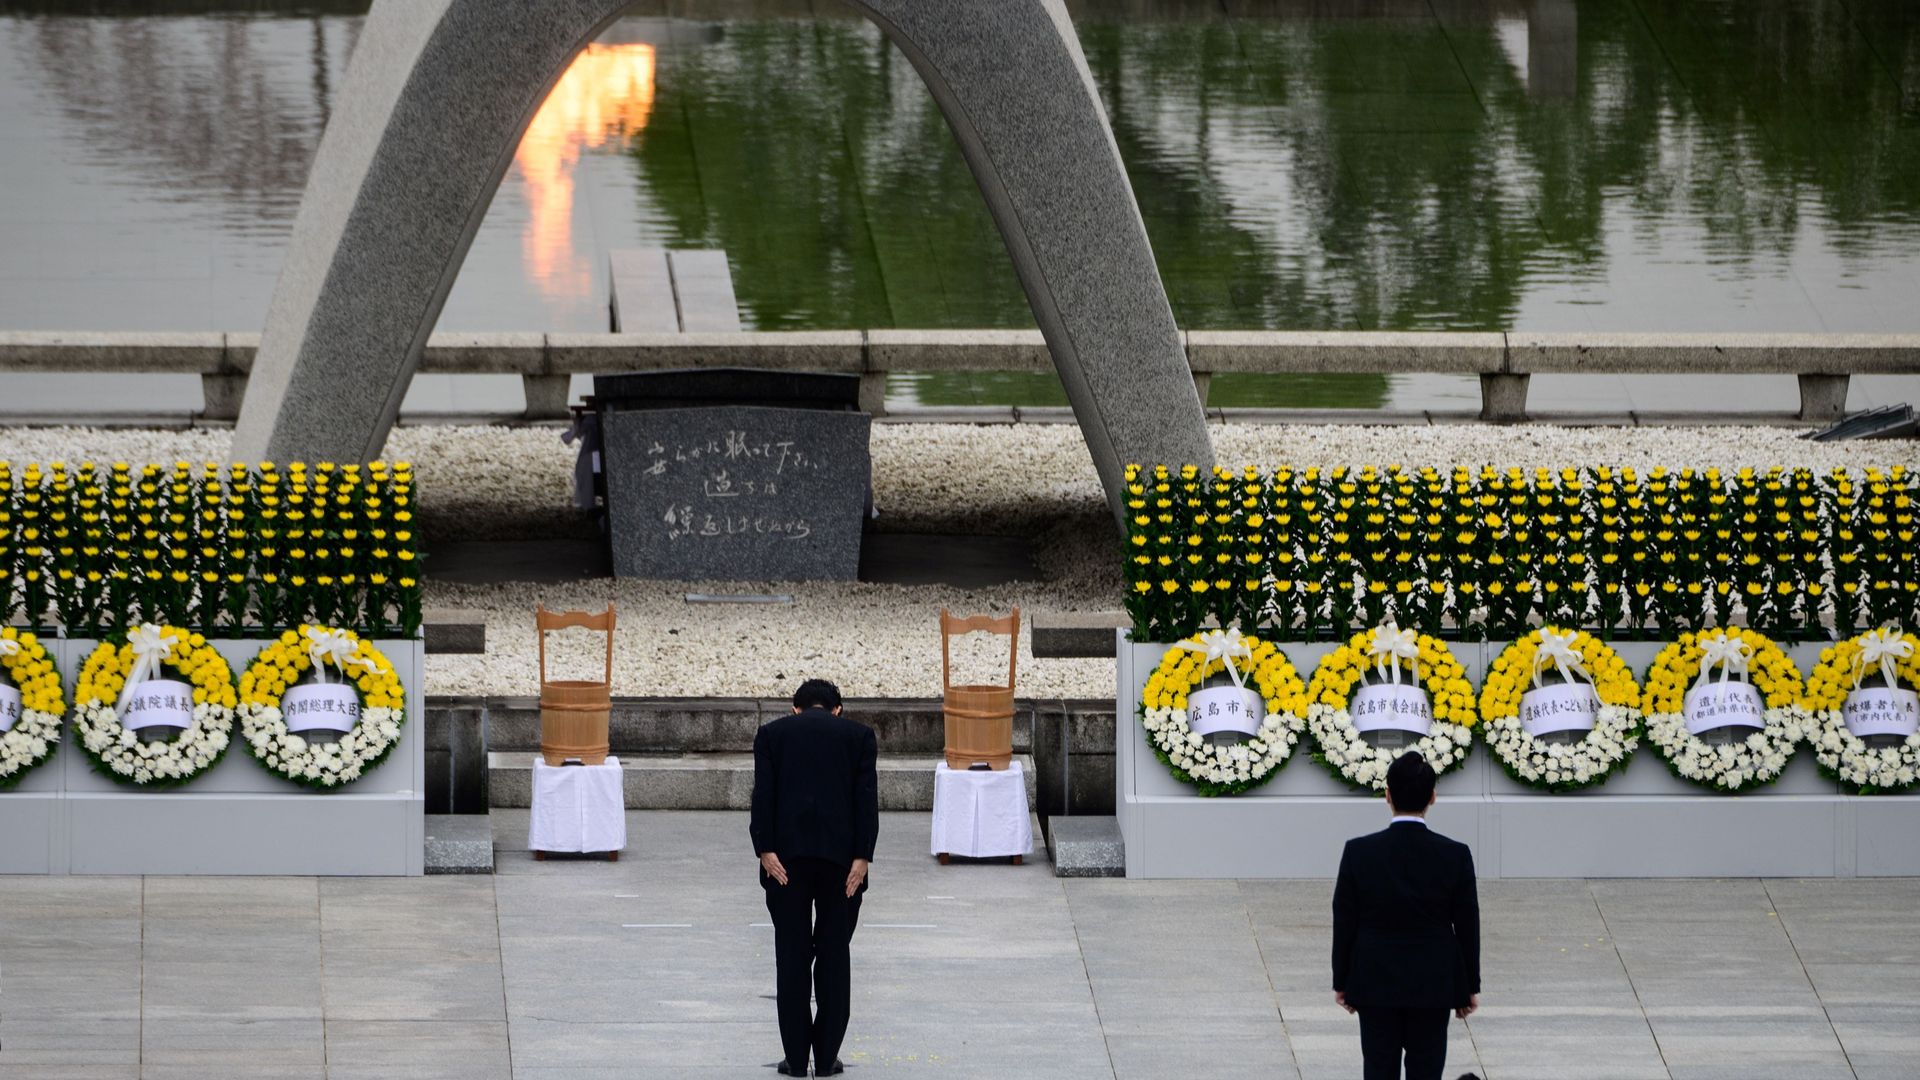 Japanese Prime Minister Shinzo Abe bows in front of the Memorial Cenotaph on the 75th anniversary memorial service for atomic bomb victims at the Peace Memorial Park in Hiroshima on August 6